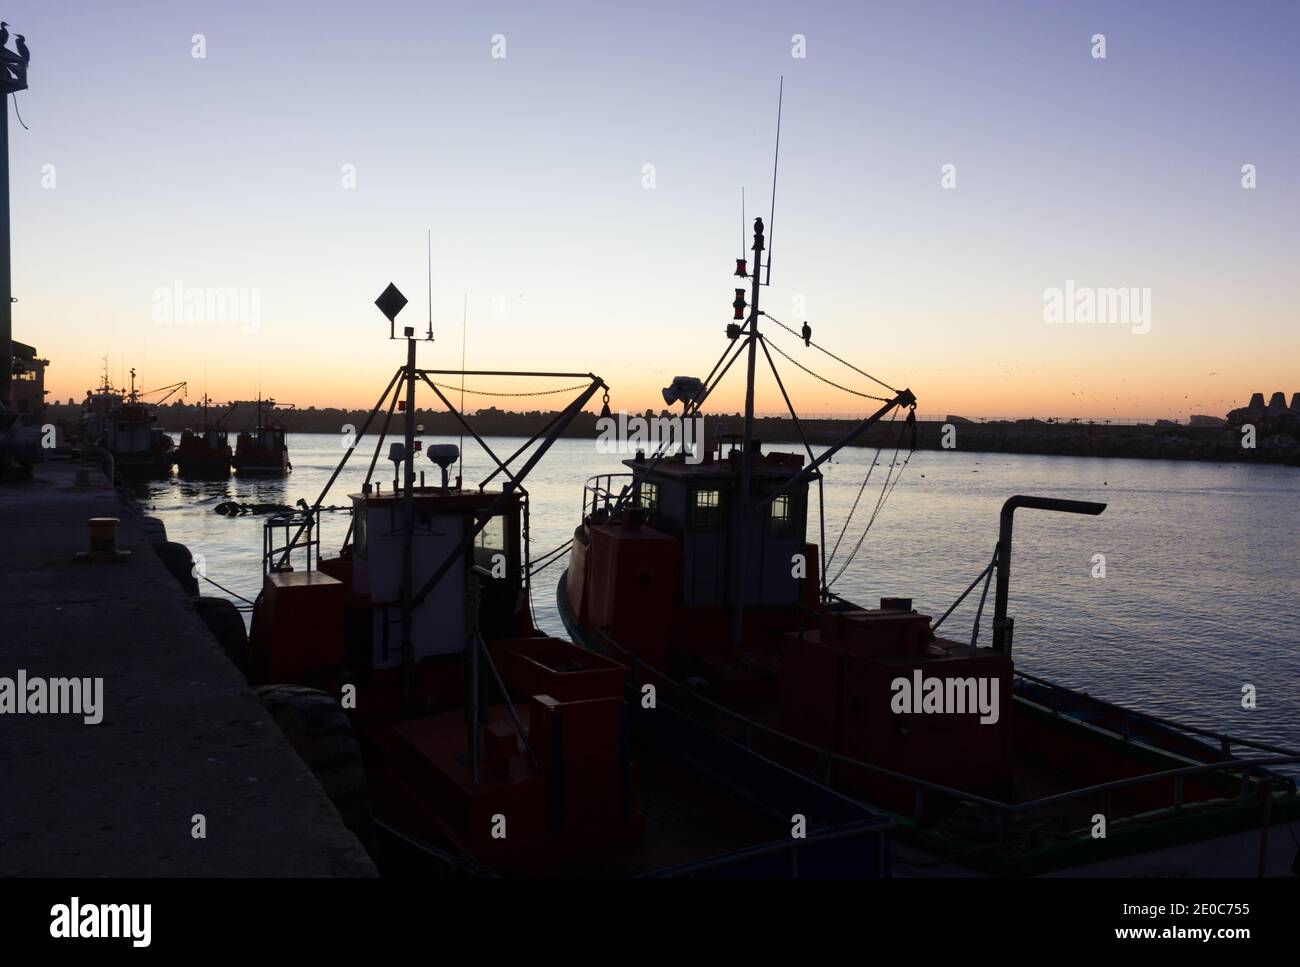 commercial fishing boats silhouettes in the evening light at Lamberts Bay, South Africa concept fishing industry Stock Photo